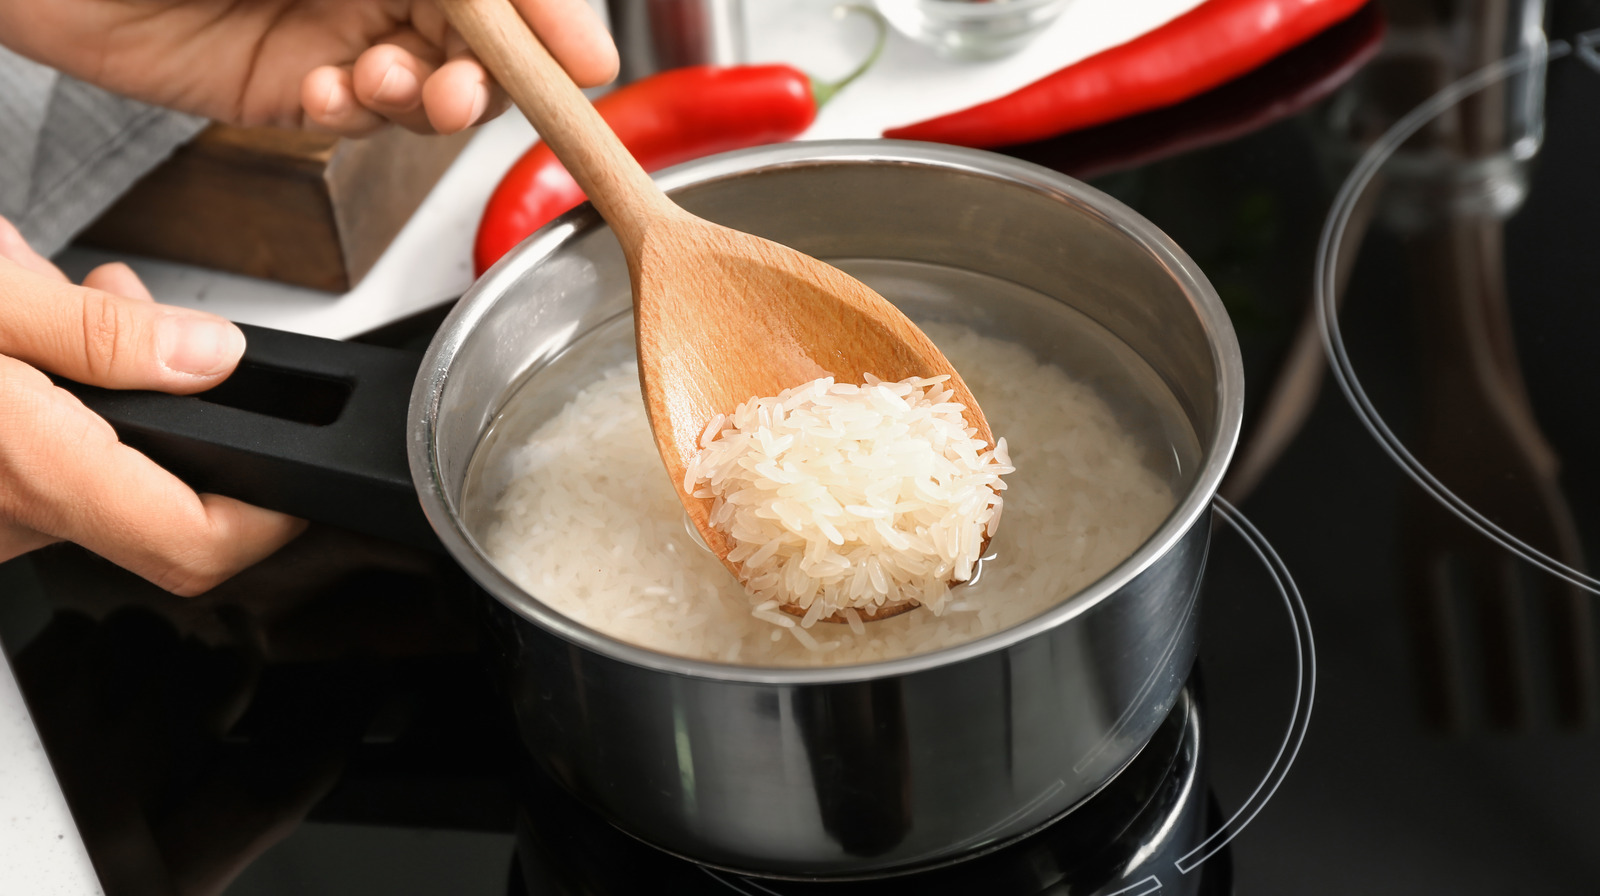 When cooking rice on the stovetop, should the lid be left on or